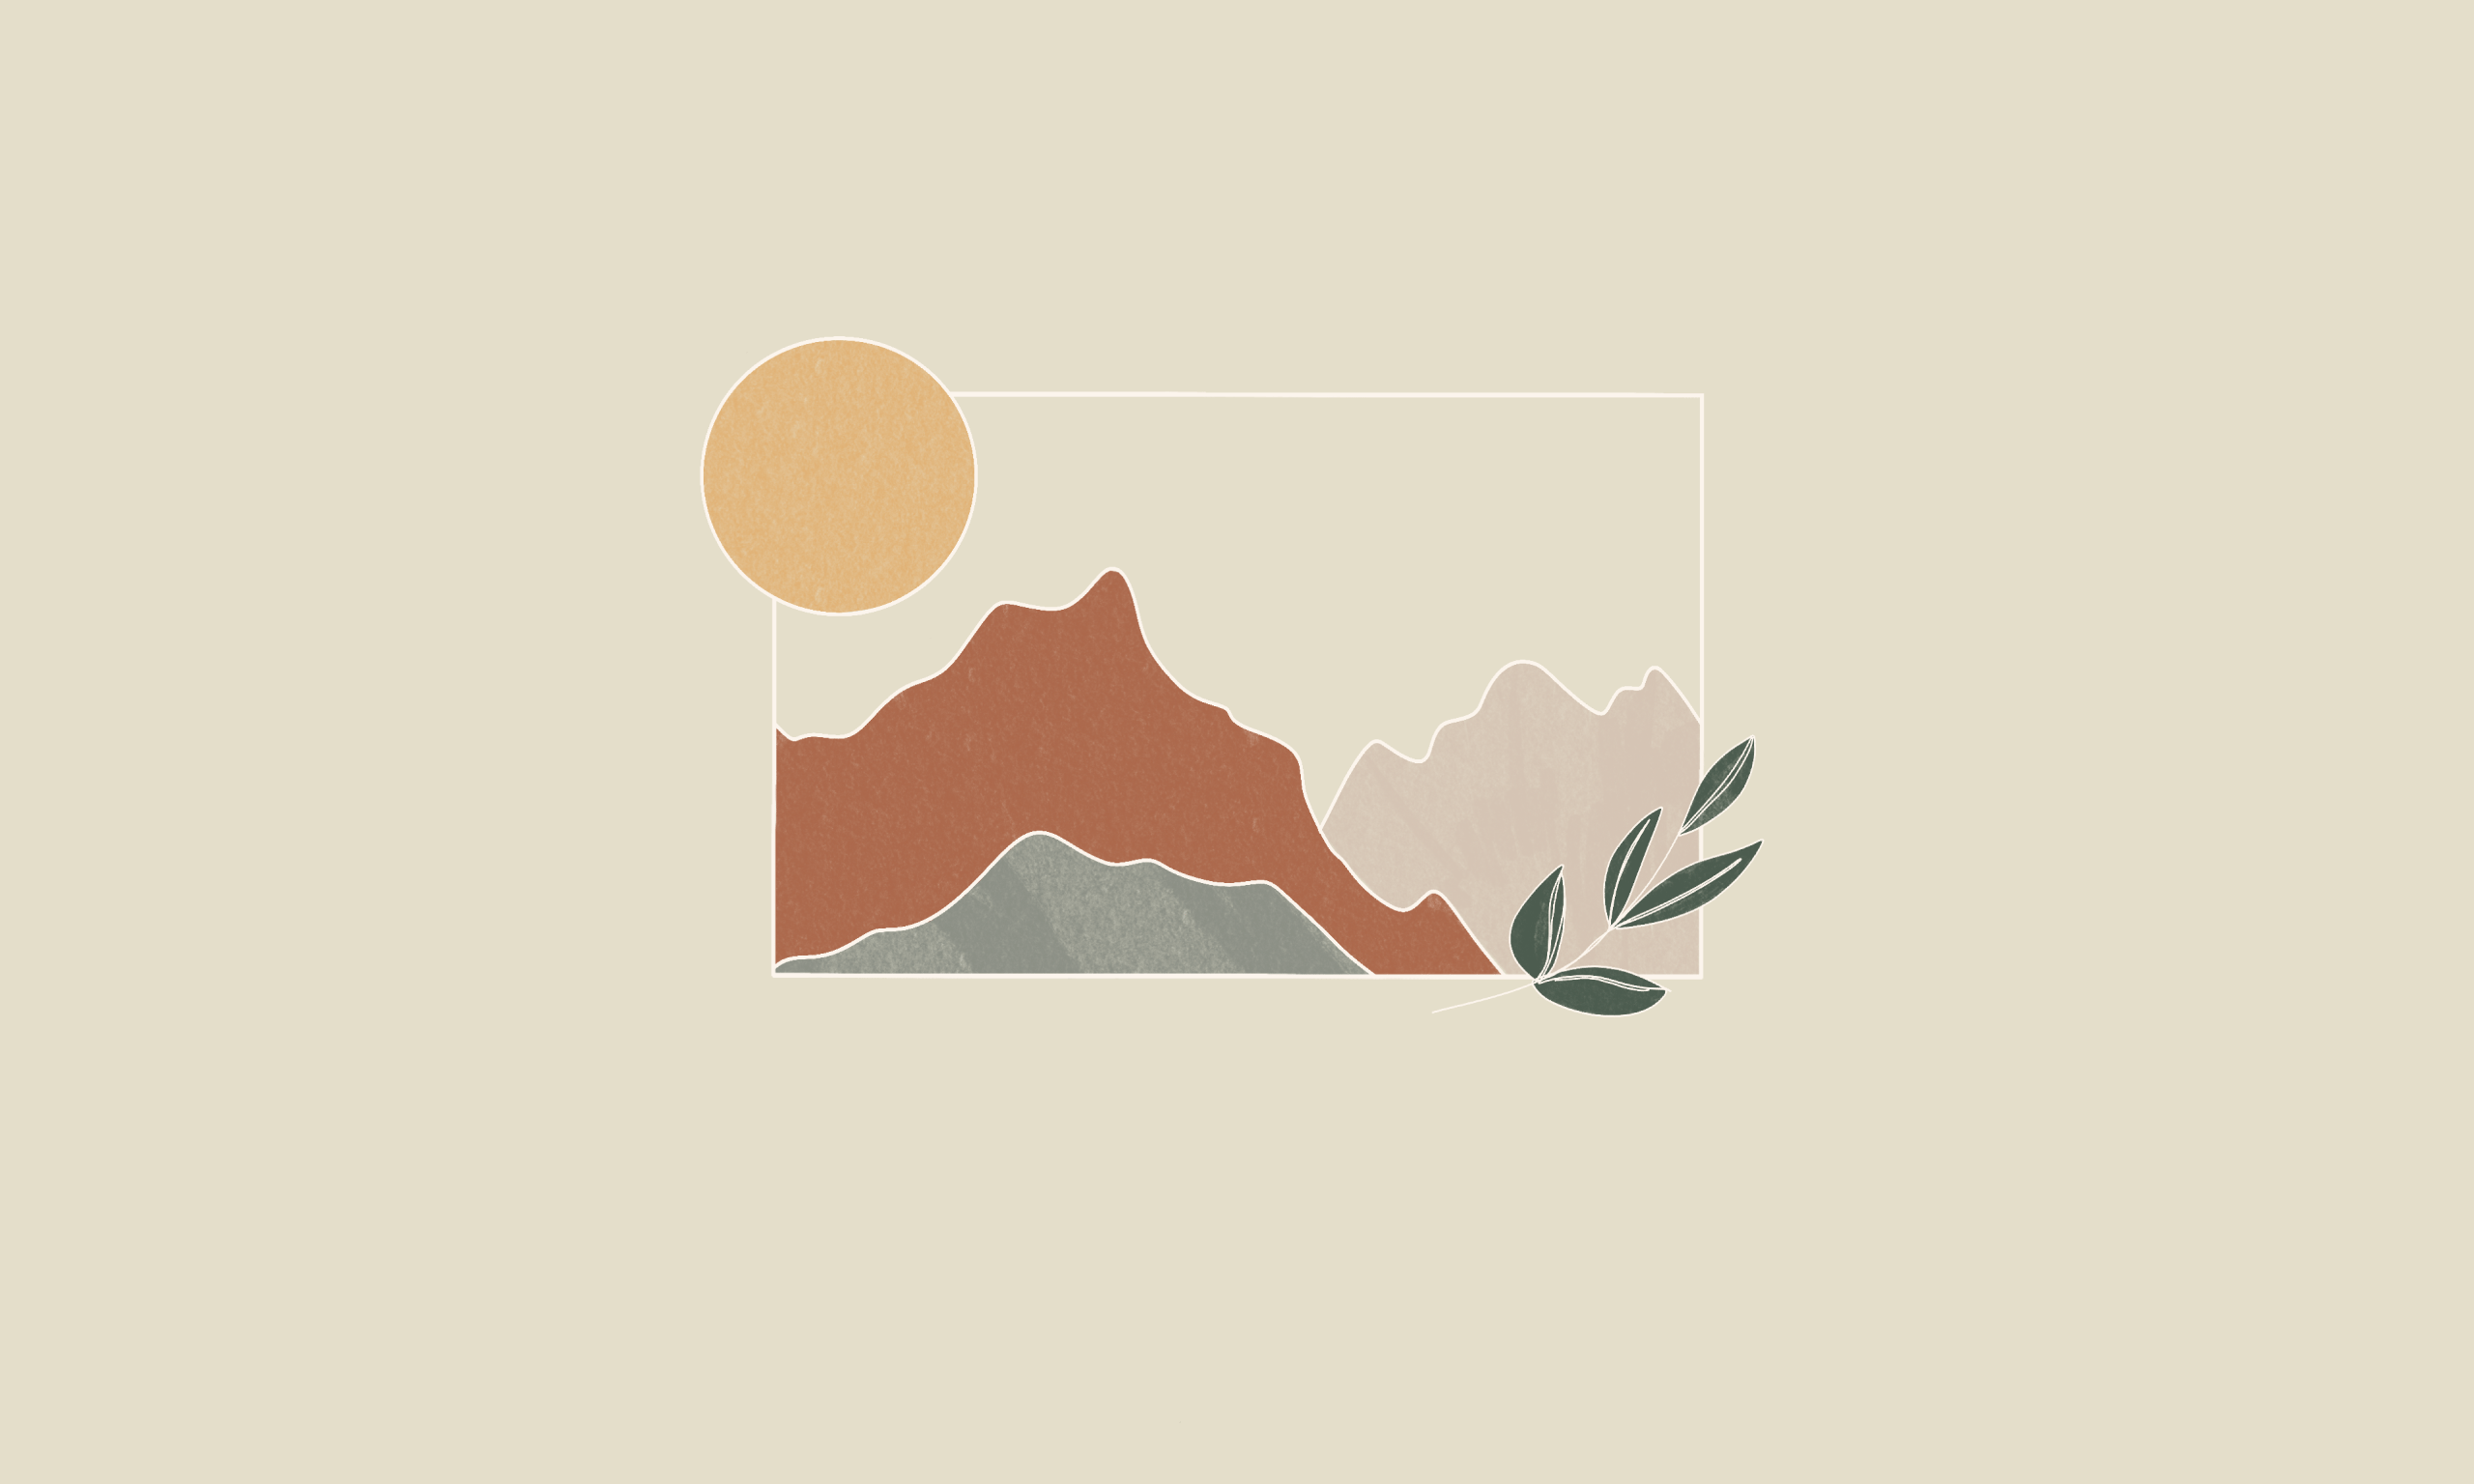 General 2560x1536 minimalism artwork simple background Sun mountains leaves white background frame